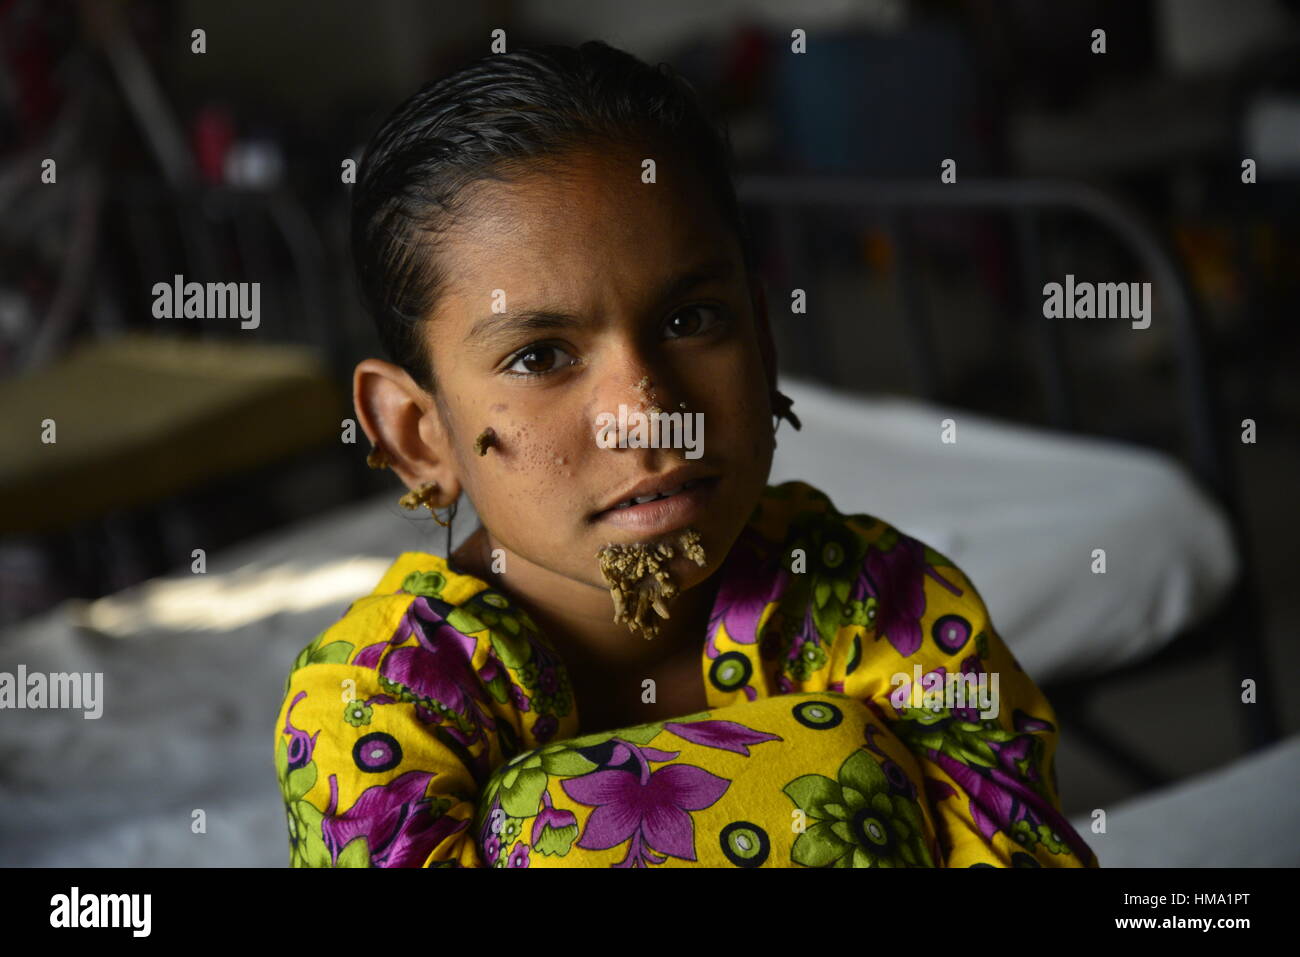 Bangladeshi patient Sahana Khatun, 10, poses for a photograph at the Dhaka Medical College and Hospital. On February 1, 2017 A young Bangladeshi girl with bark-like warts growing on her face could be the first female ever afflicted by so-called 'tree man syndrome', doctors studying the rare condition said January 31. Ten-year-old Sahana Khatun has the tell-tale gnarled growths sprouting from her chin, ear and nose, but doctors at Dhaka's Medical College Hospital are still conducting tests to establish if she has the unusual skin disorder. Stock Photo